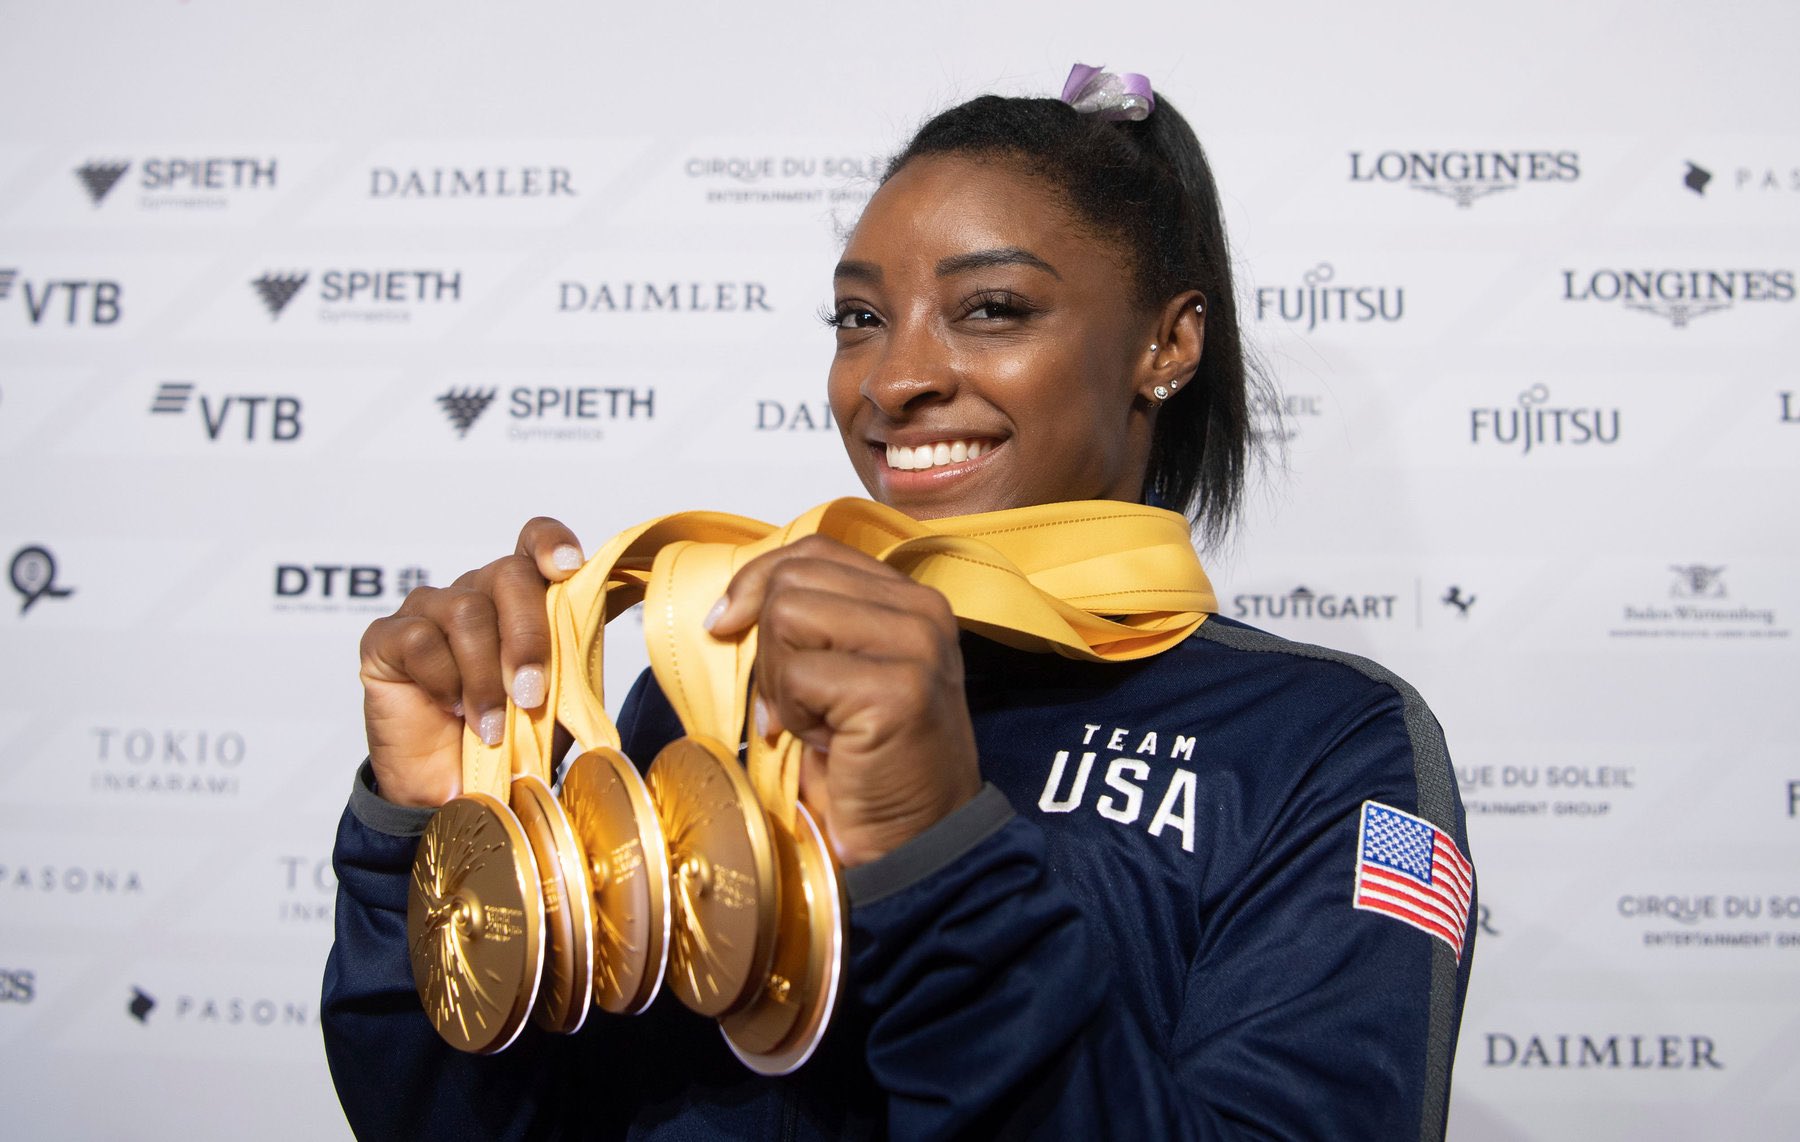 Happy birthday to Simone Biles, born in this day March 14! 